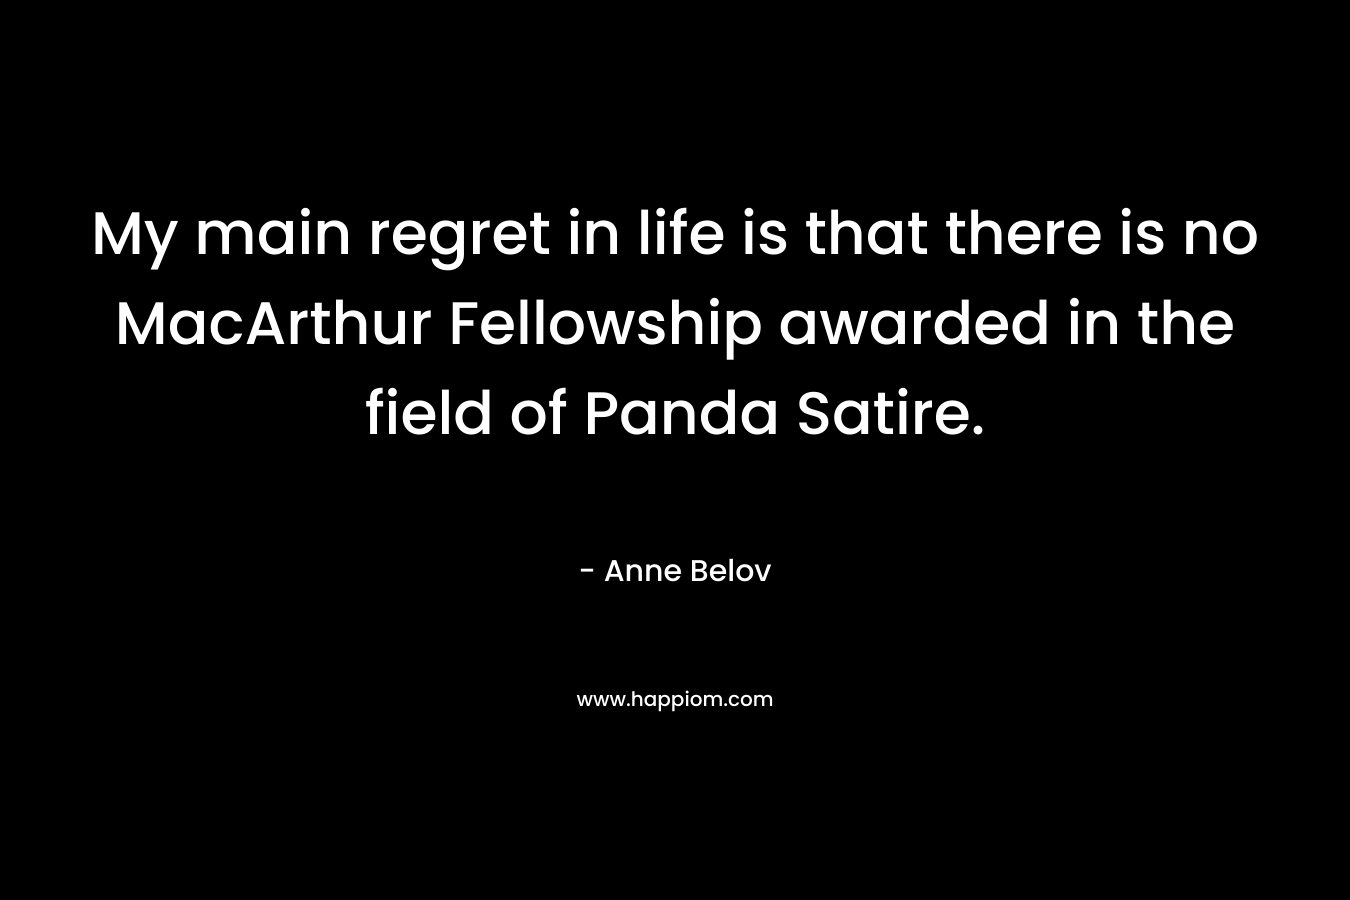 My main regret in life is that there is no MacArthur Fellowship awarded in the field of Panda Satire.